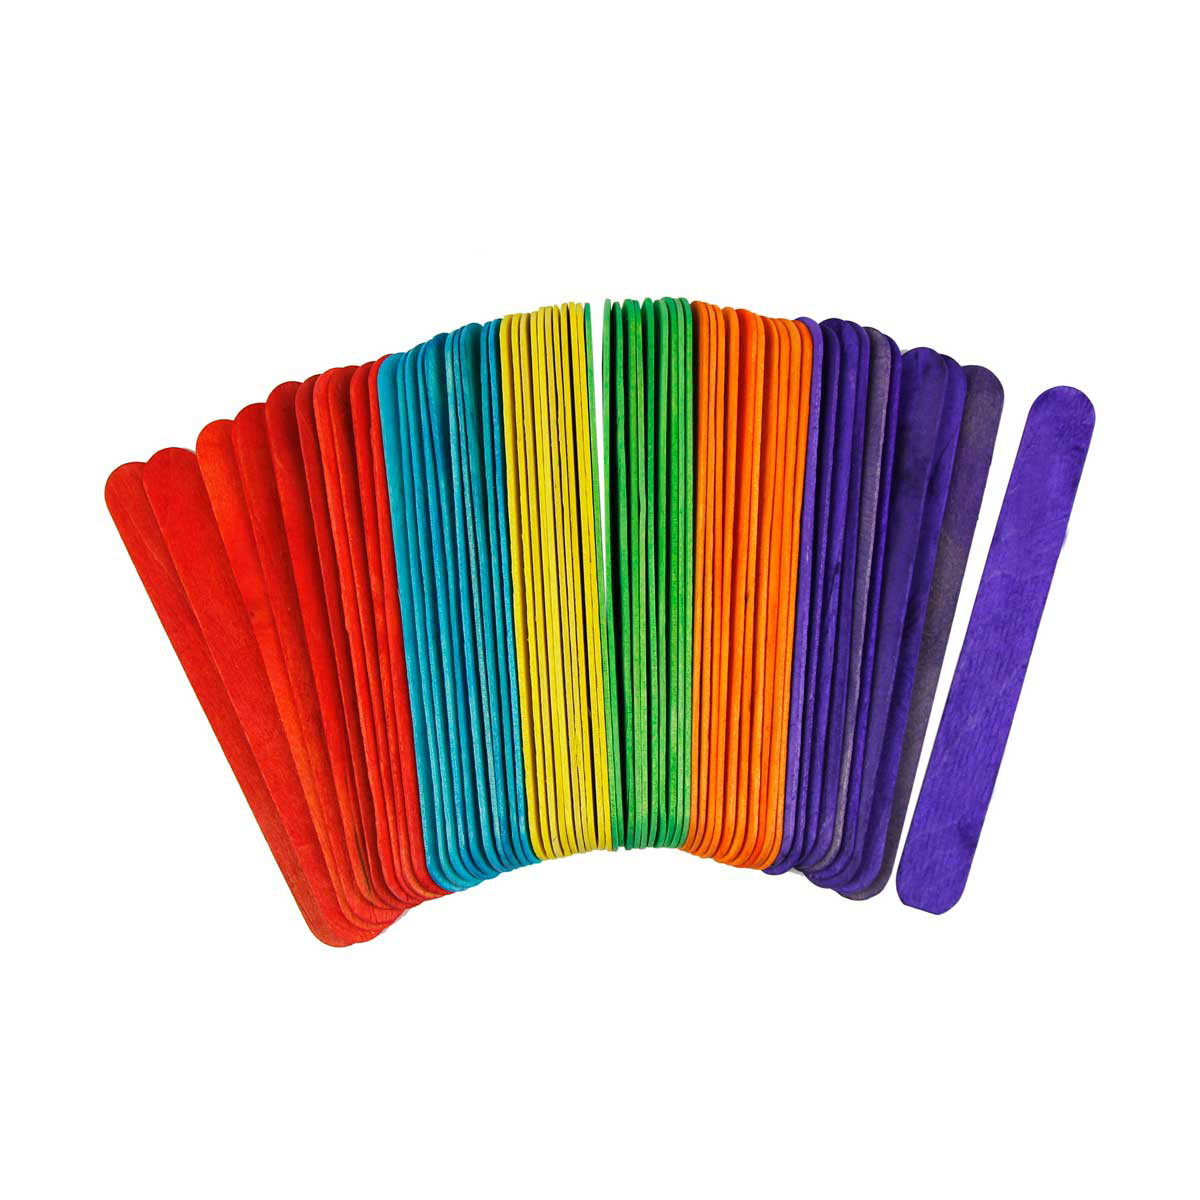 Make Shoppe Jumbo Craft Sticks, Colored, 60 Count, 0.78 X 5.9In